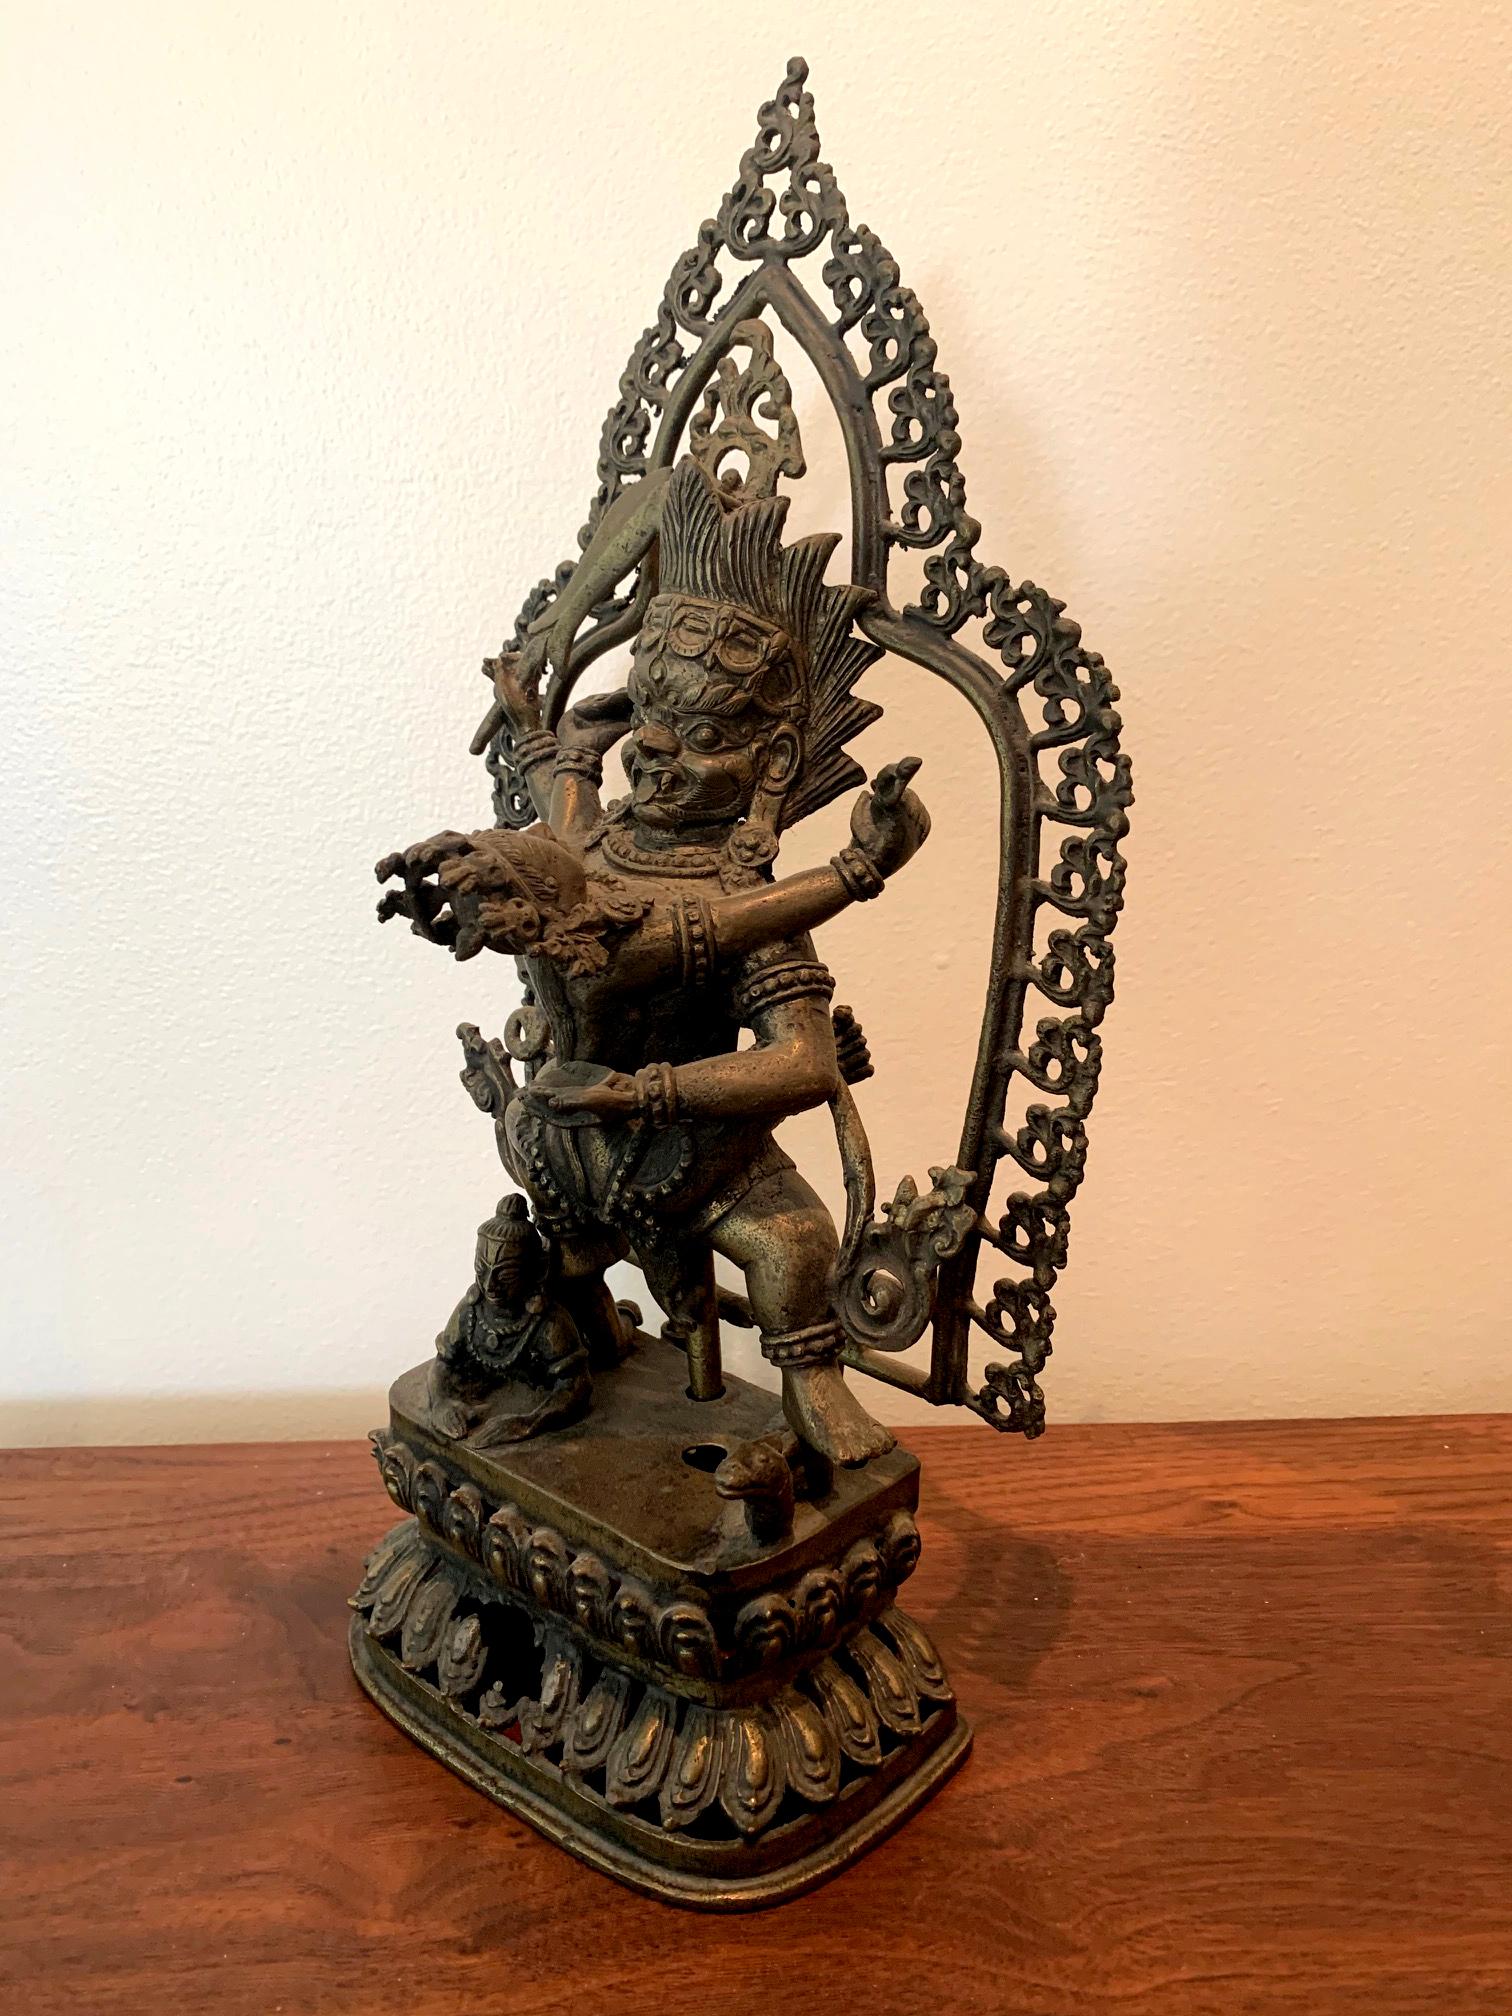 A cast bronze statue of Yamantaka and his envisioned consort Vajravetali on lotus throne and with a halo canopy, Tibetan, circa 19th century. The statue was cast in section with the main figures inserted onto the throne. Yamantaka, also known as